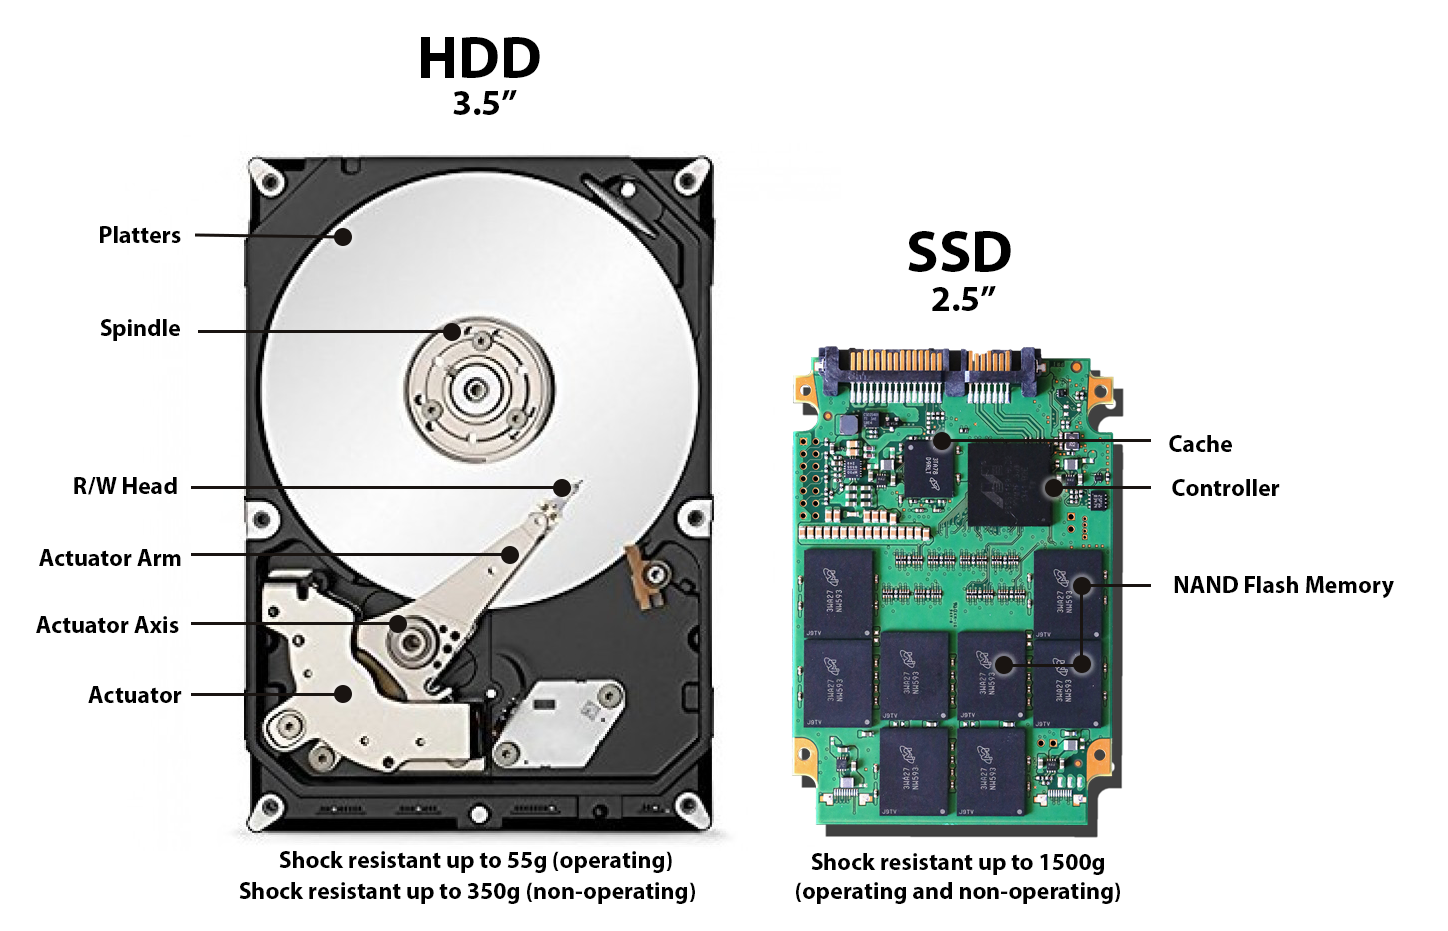 Hdd Vs Ssd What Does The Future For Storage Hold 5169